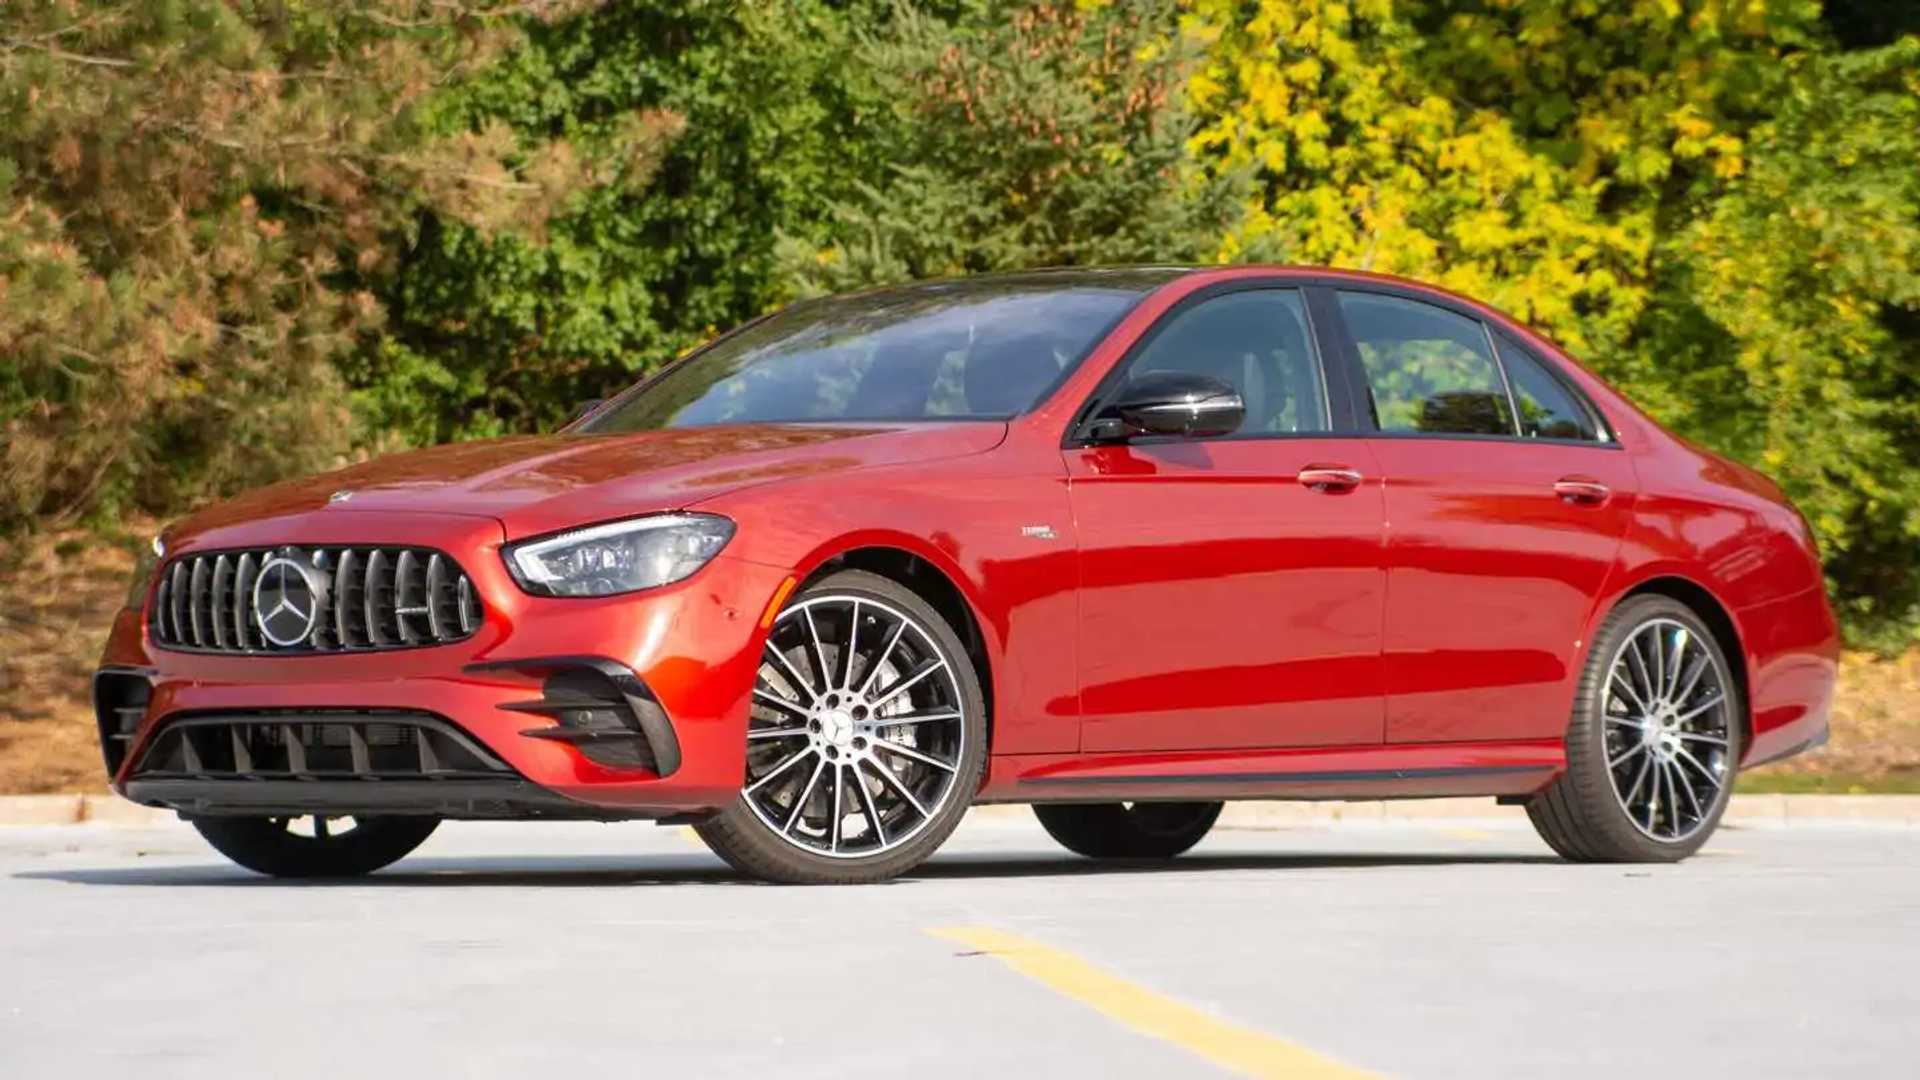 2021 Mercedes-AMG E53 First Drive Review: An Argument For The Middle Child